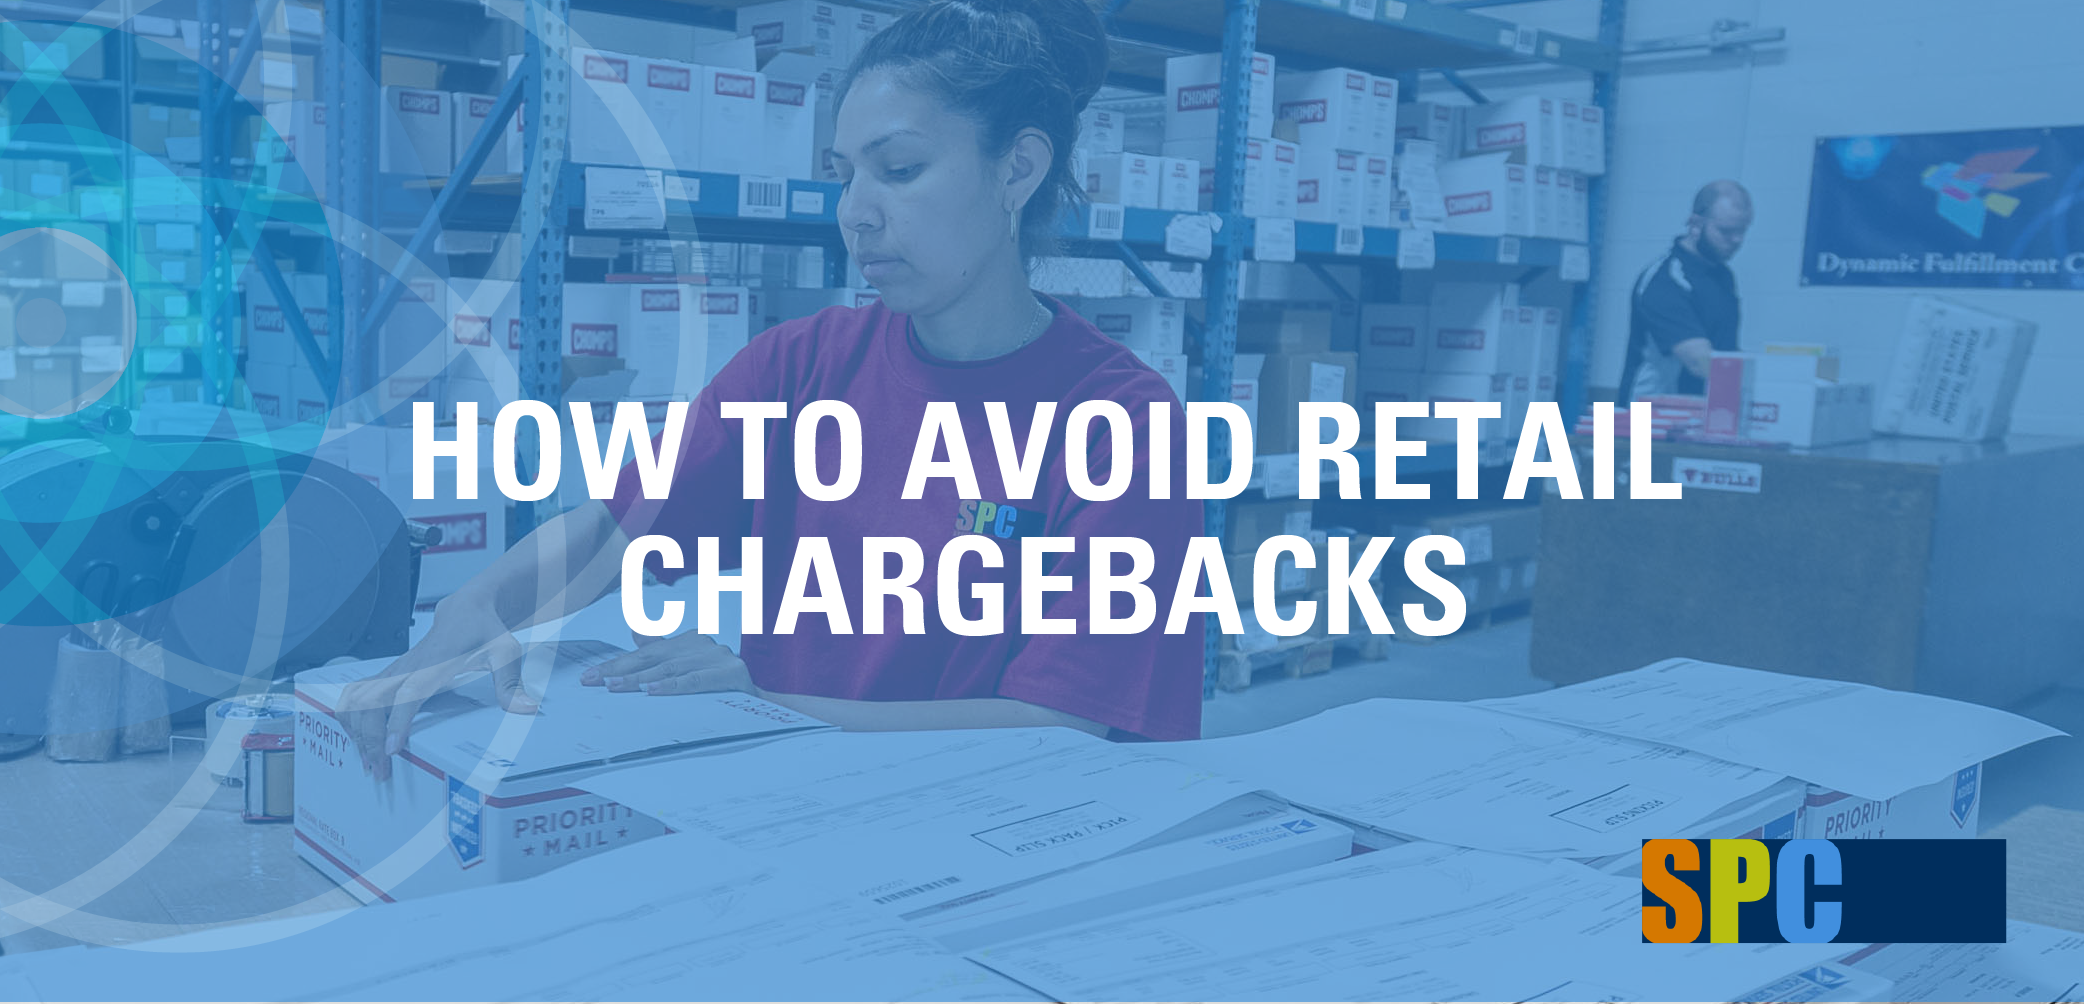 How to Avoid Retail Chargebacks